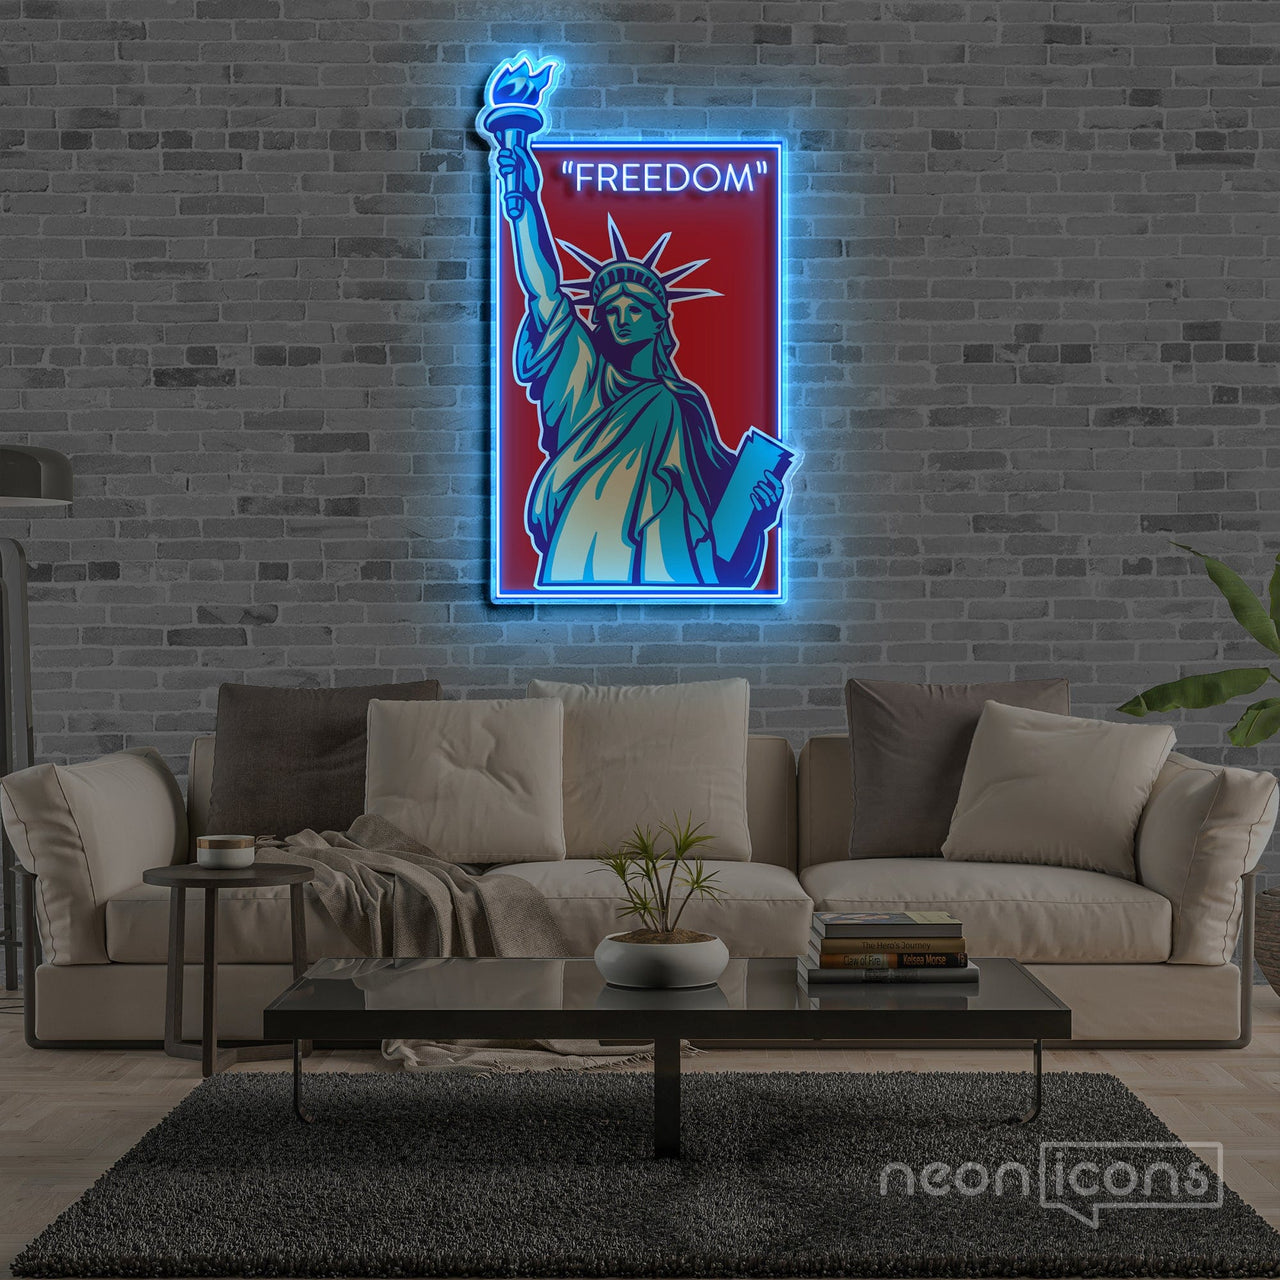 "Freedom" Neon x Acrylic Artwork by Neon Icons